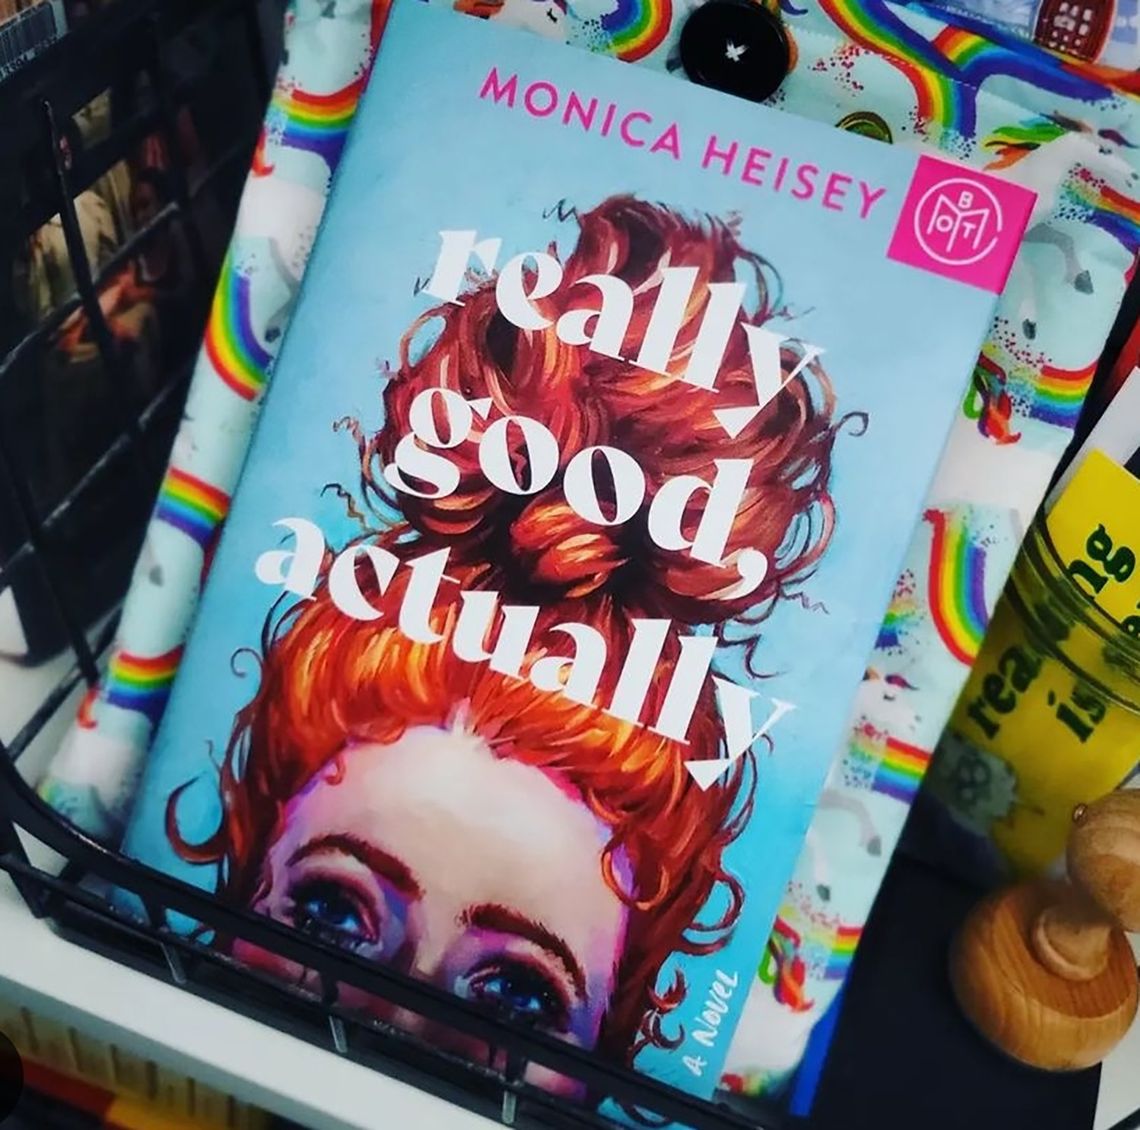 Allison's Book Report: “Really Good, Actually” by Monica Heisey